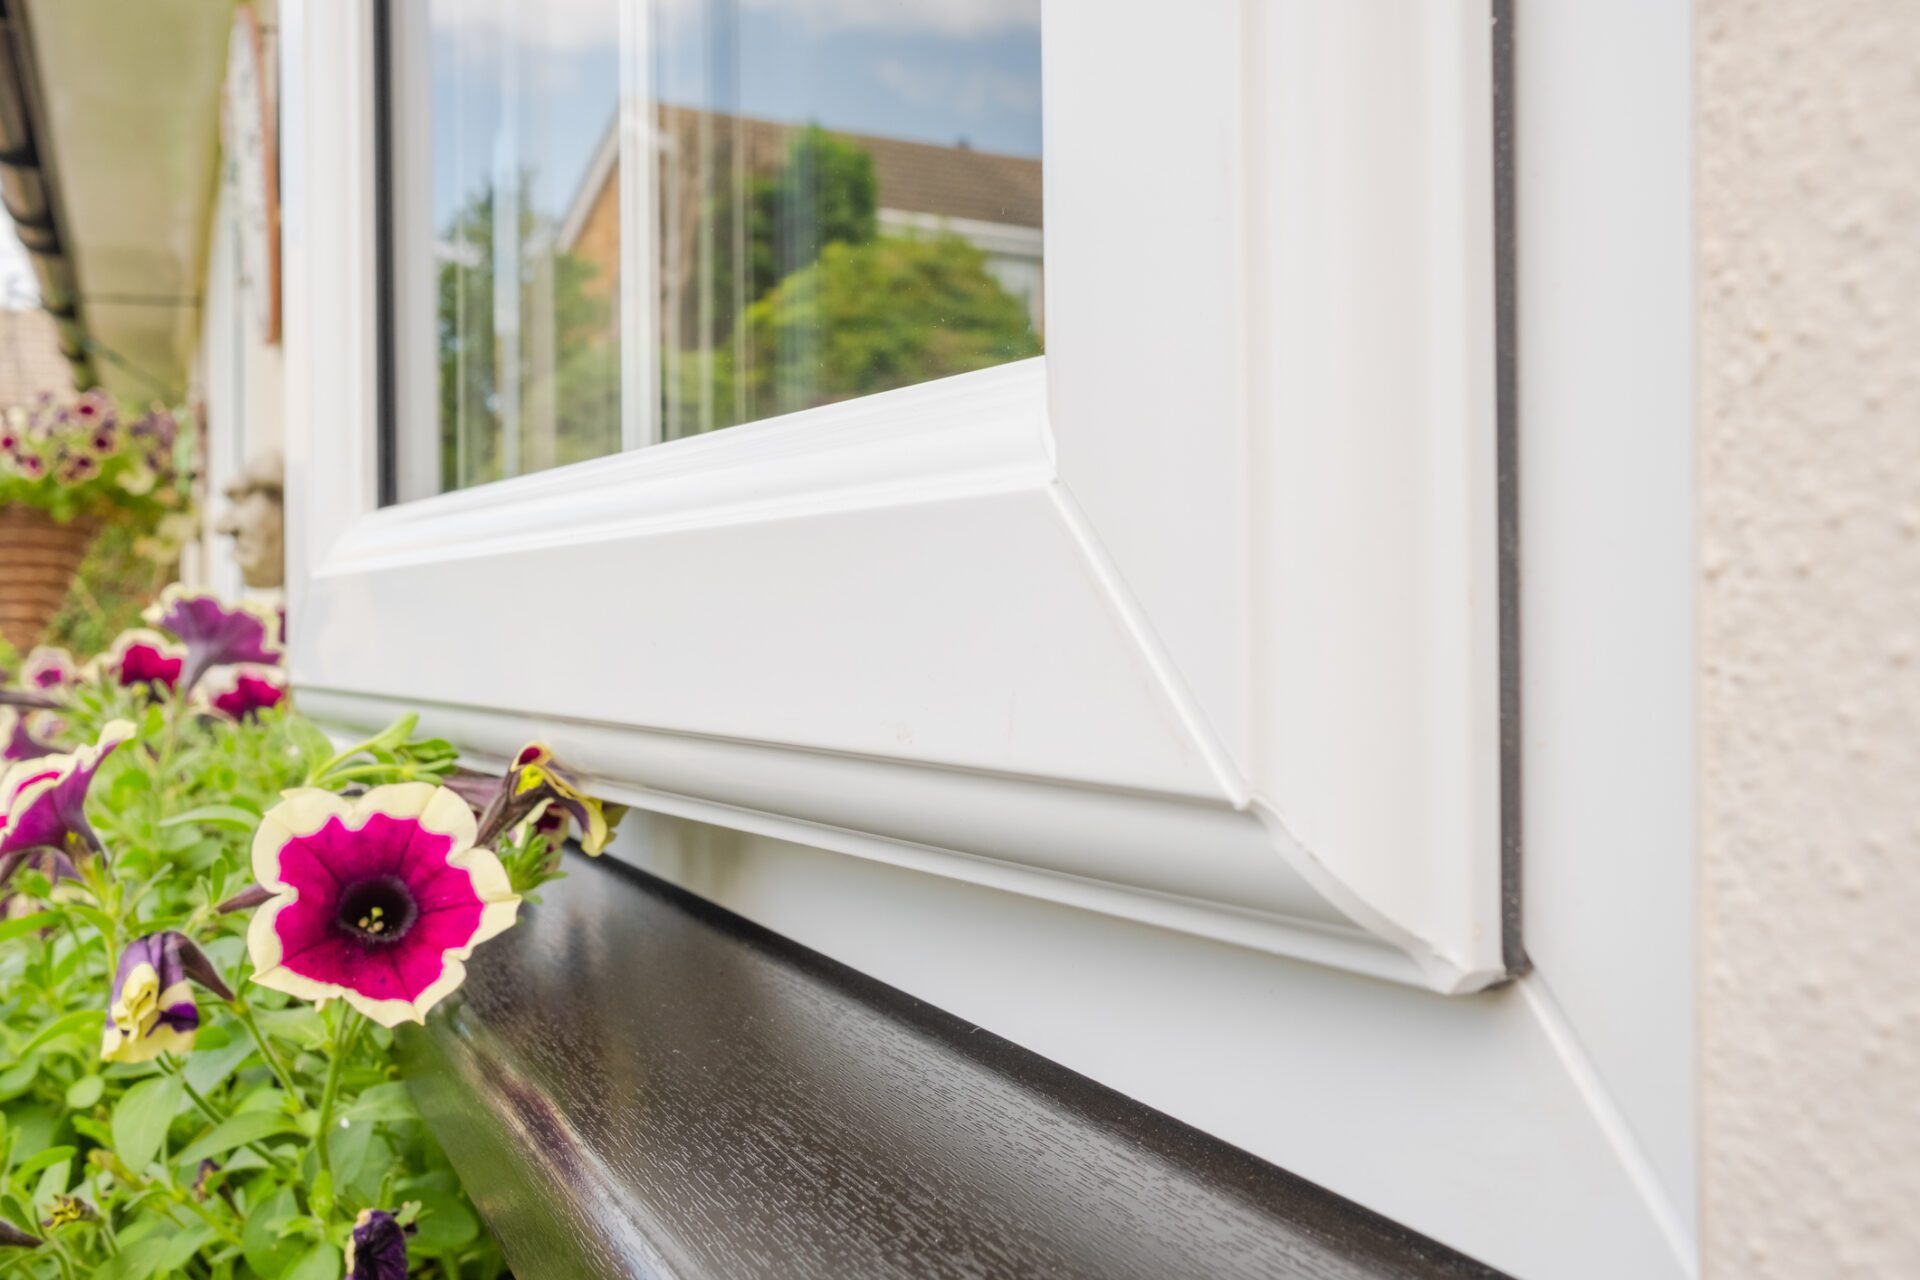 Can You Double Glaze Existing Windows?